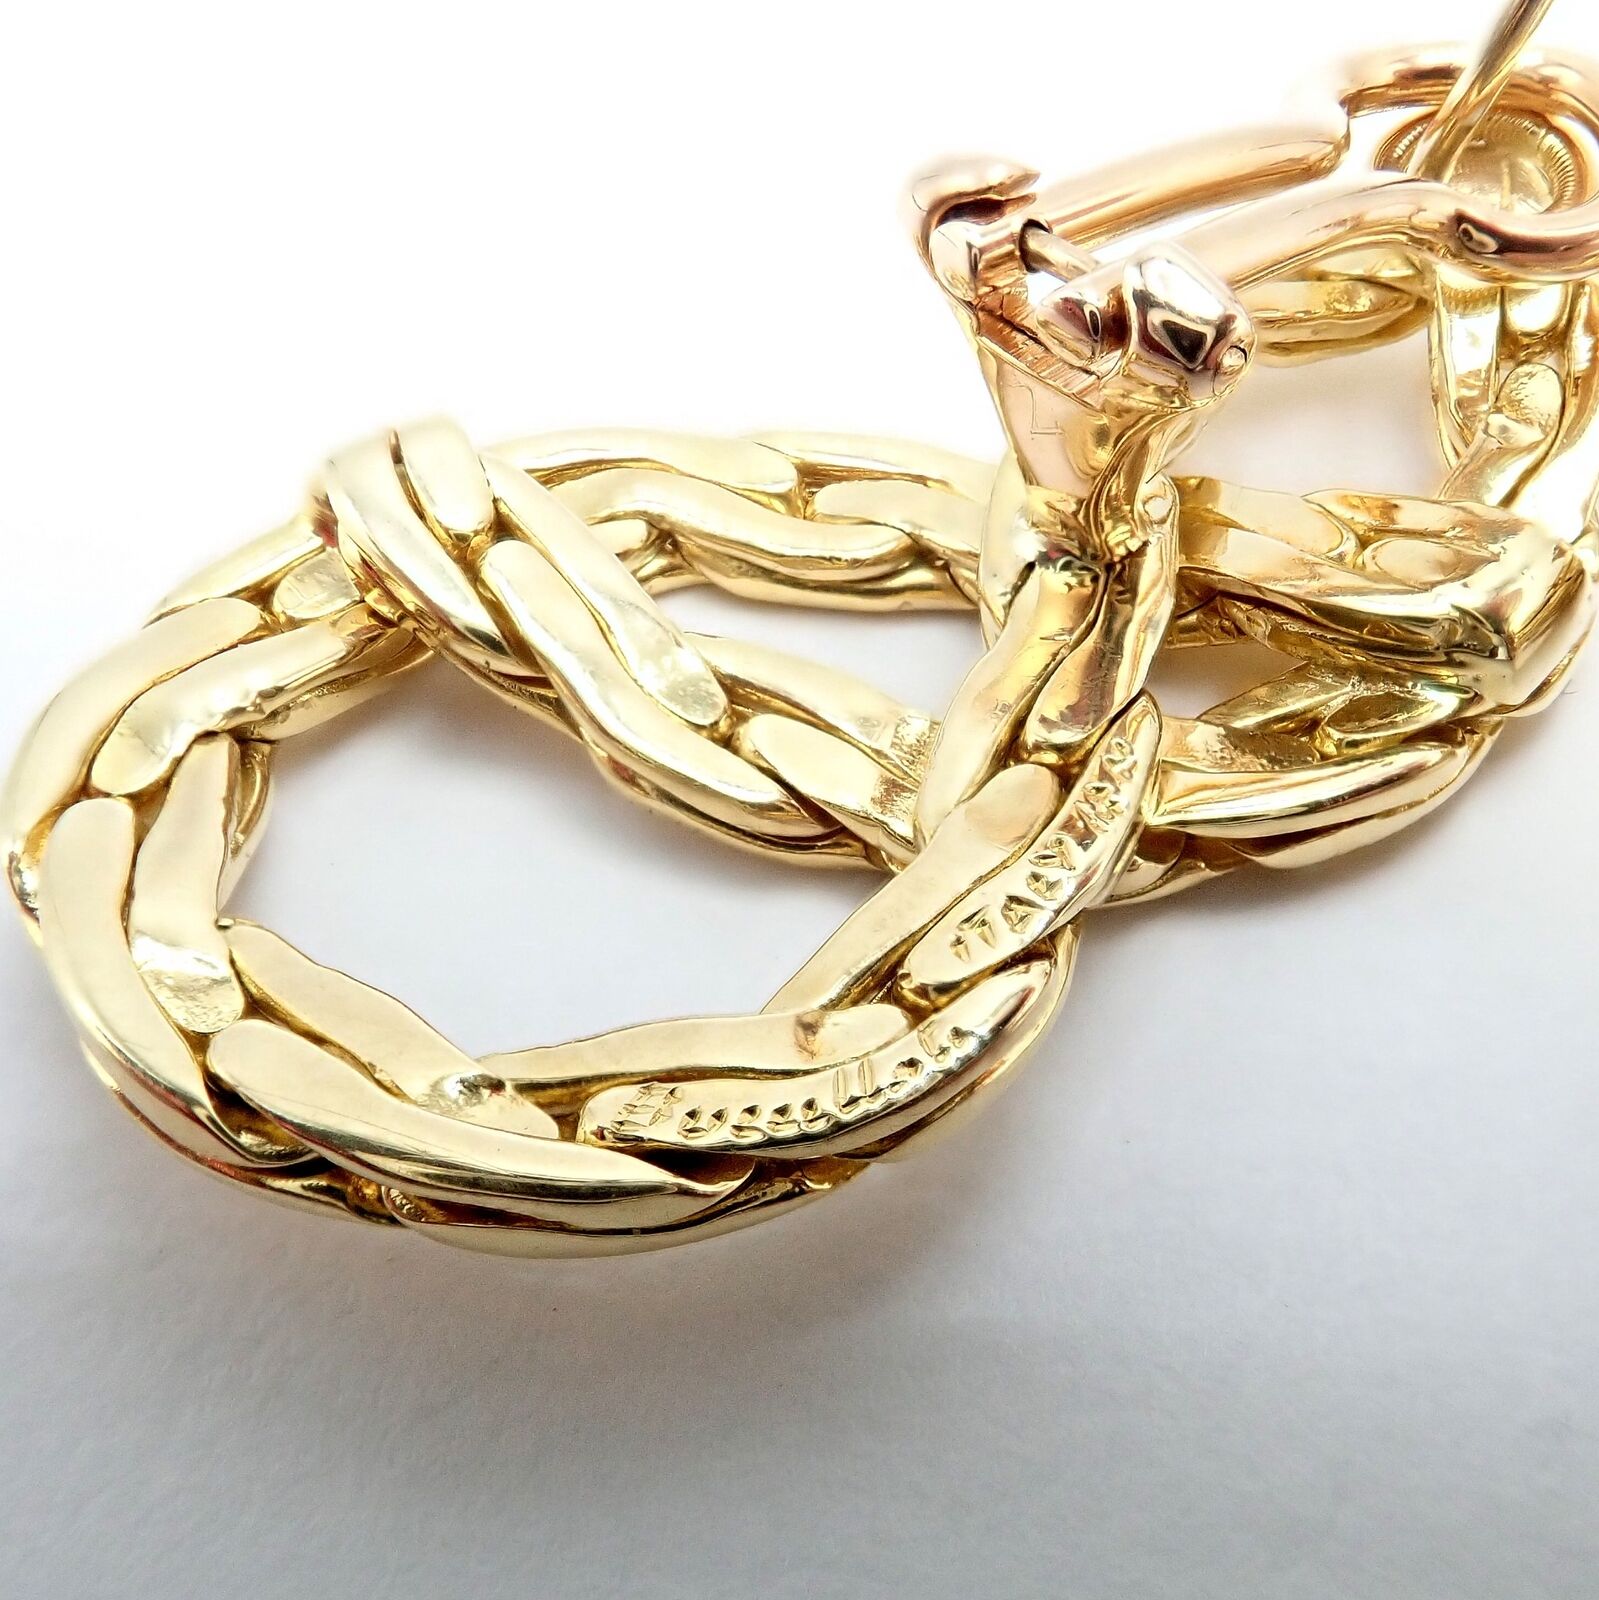 Buccellati Jewelry & Watches:Fine Jewelry:Earrings Authentic! Vintage Buccellati 18k Yellow Gold Knot Rope Coil Earrings